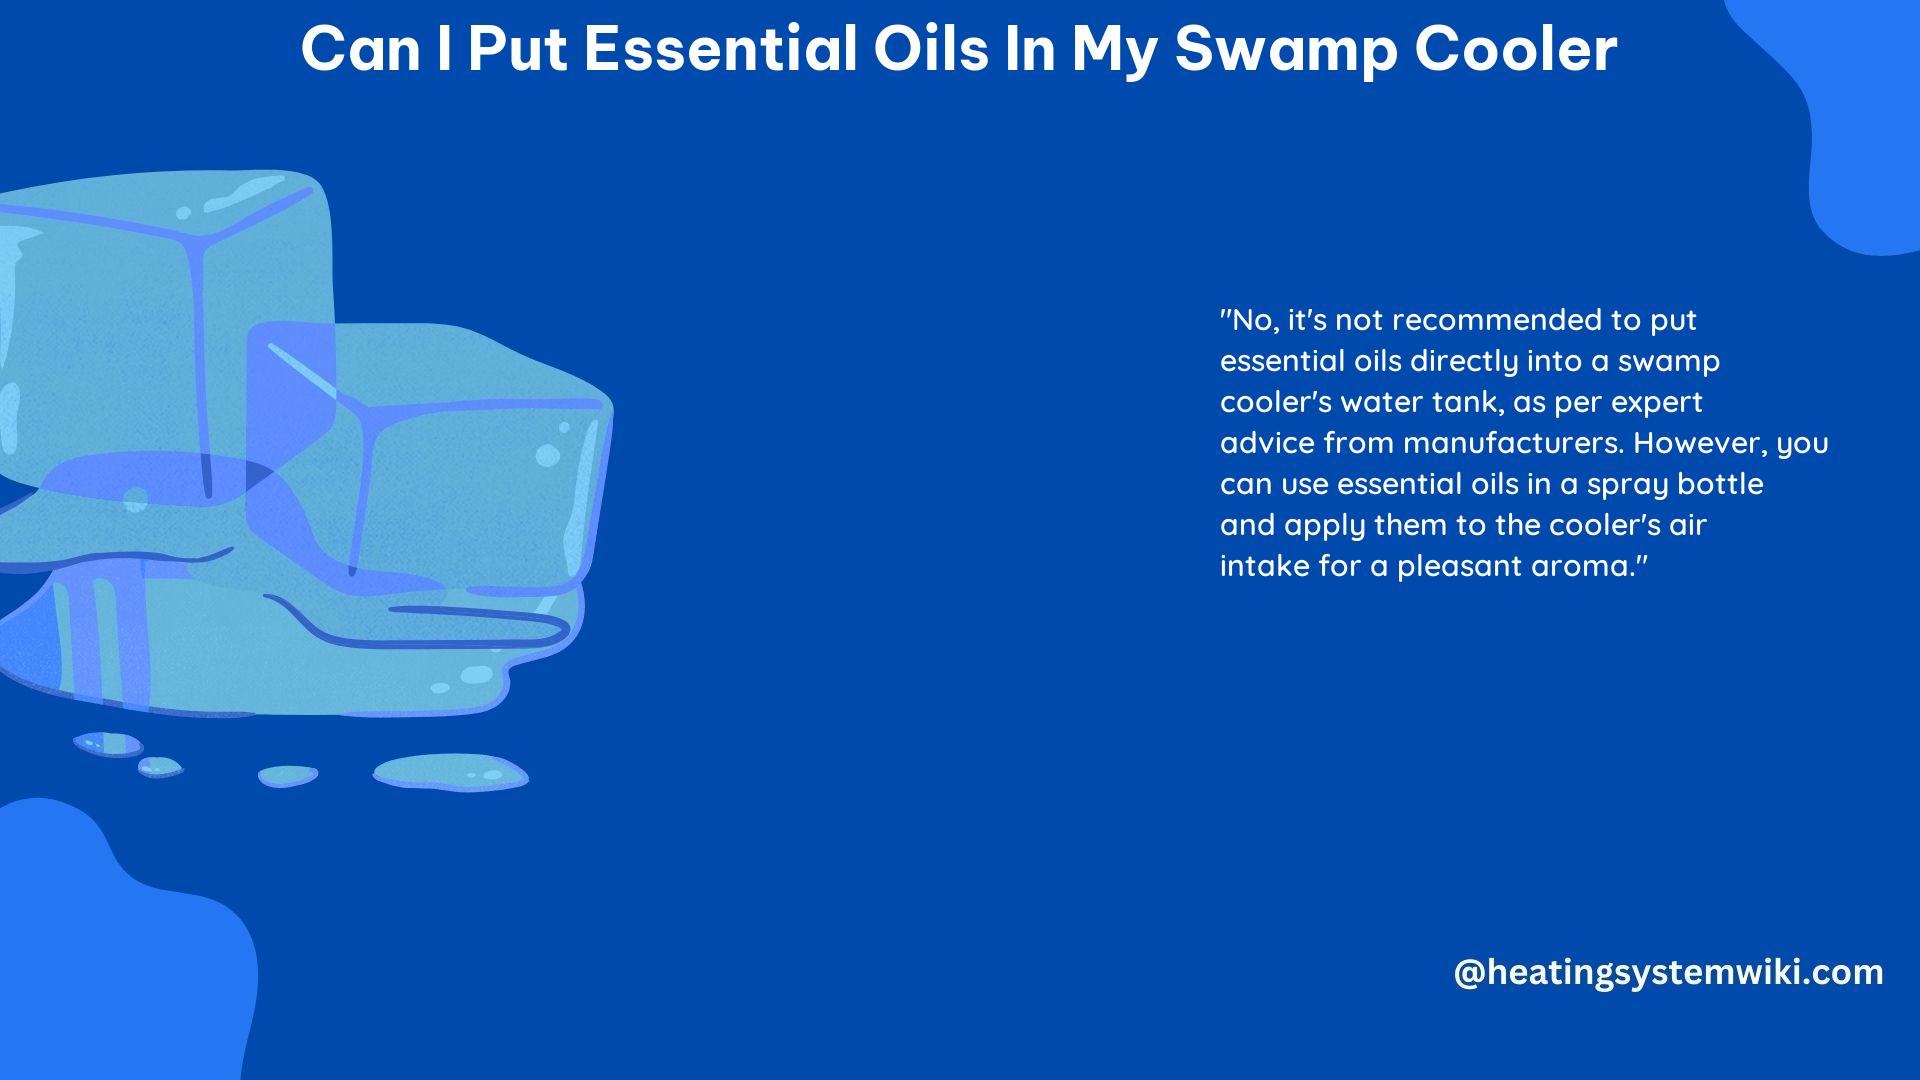 Can I Put Essential Oils in My Swamp Cooler